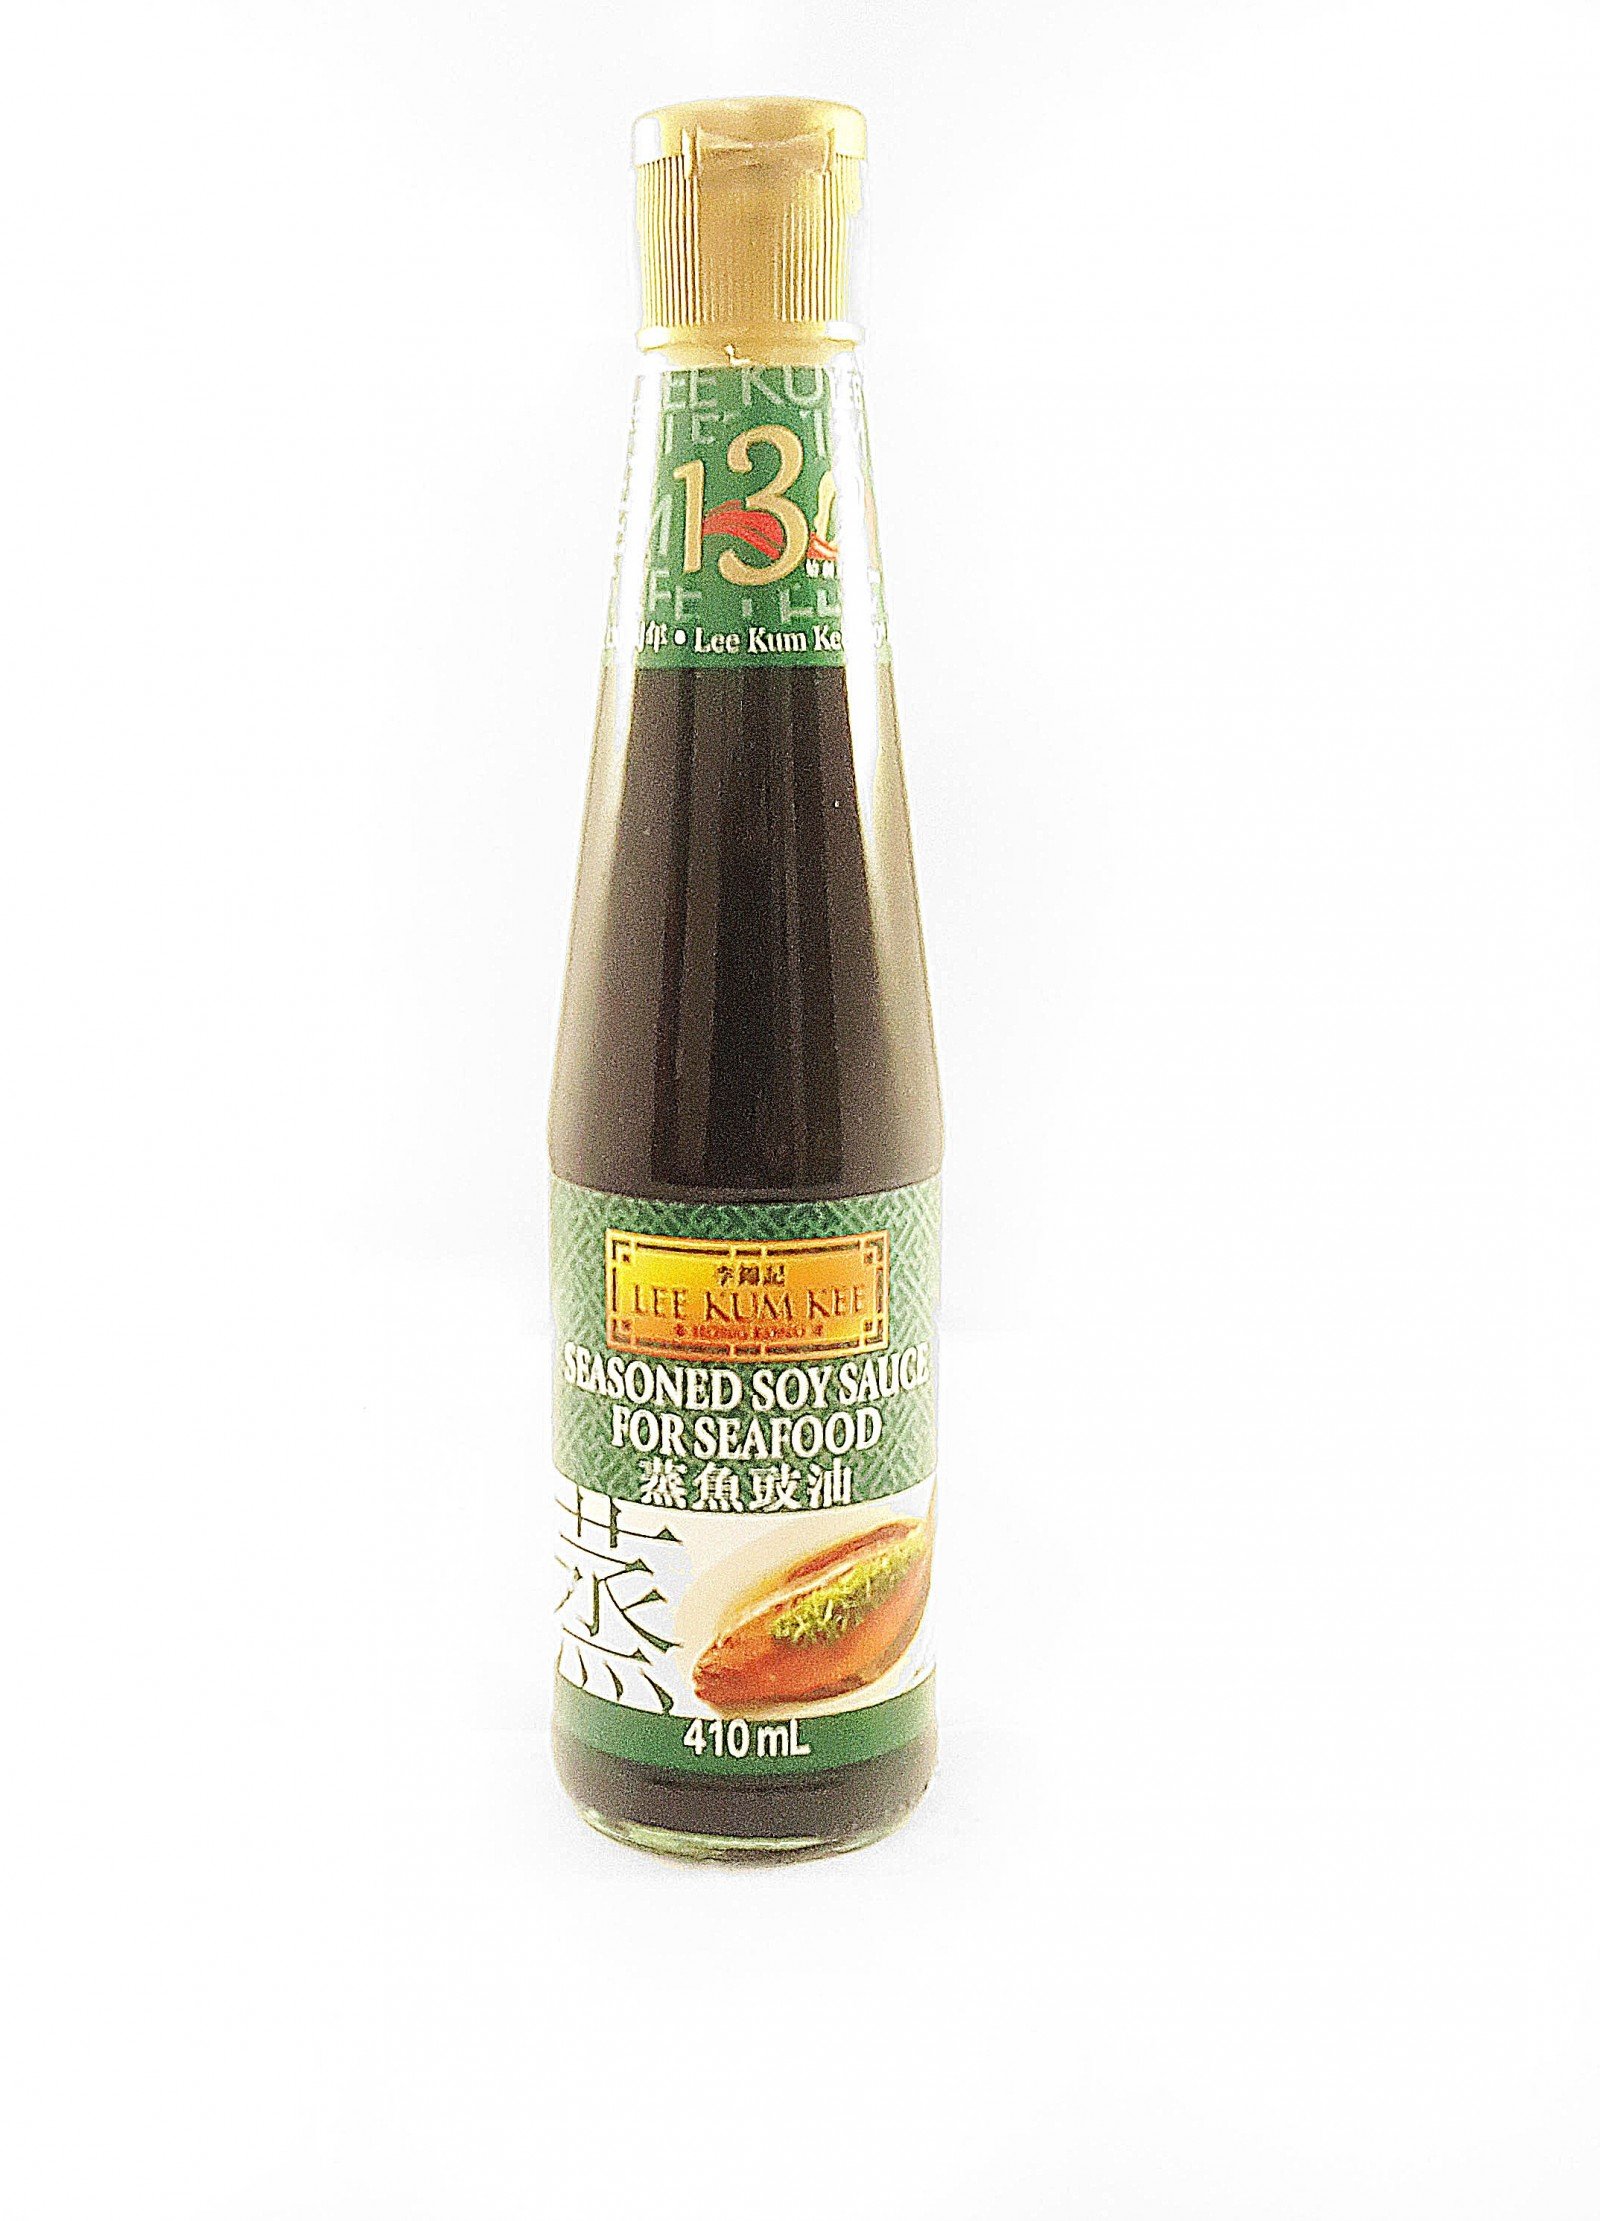 LEE KUM KEE Seasoned Soy Sauce for Seafood 410ml Condiments